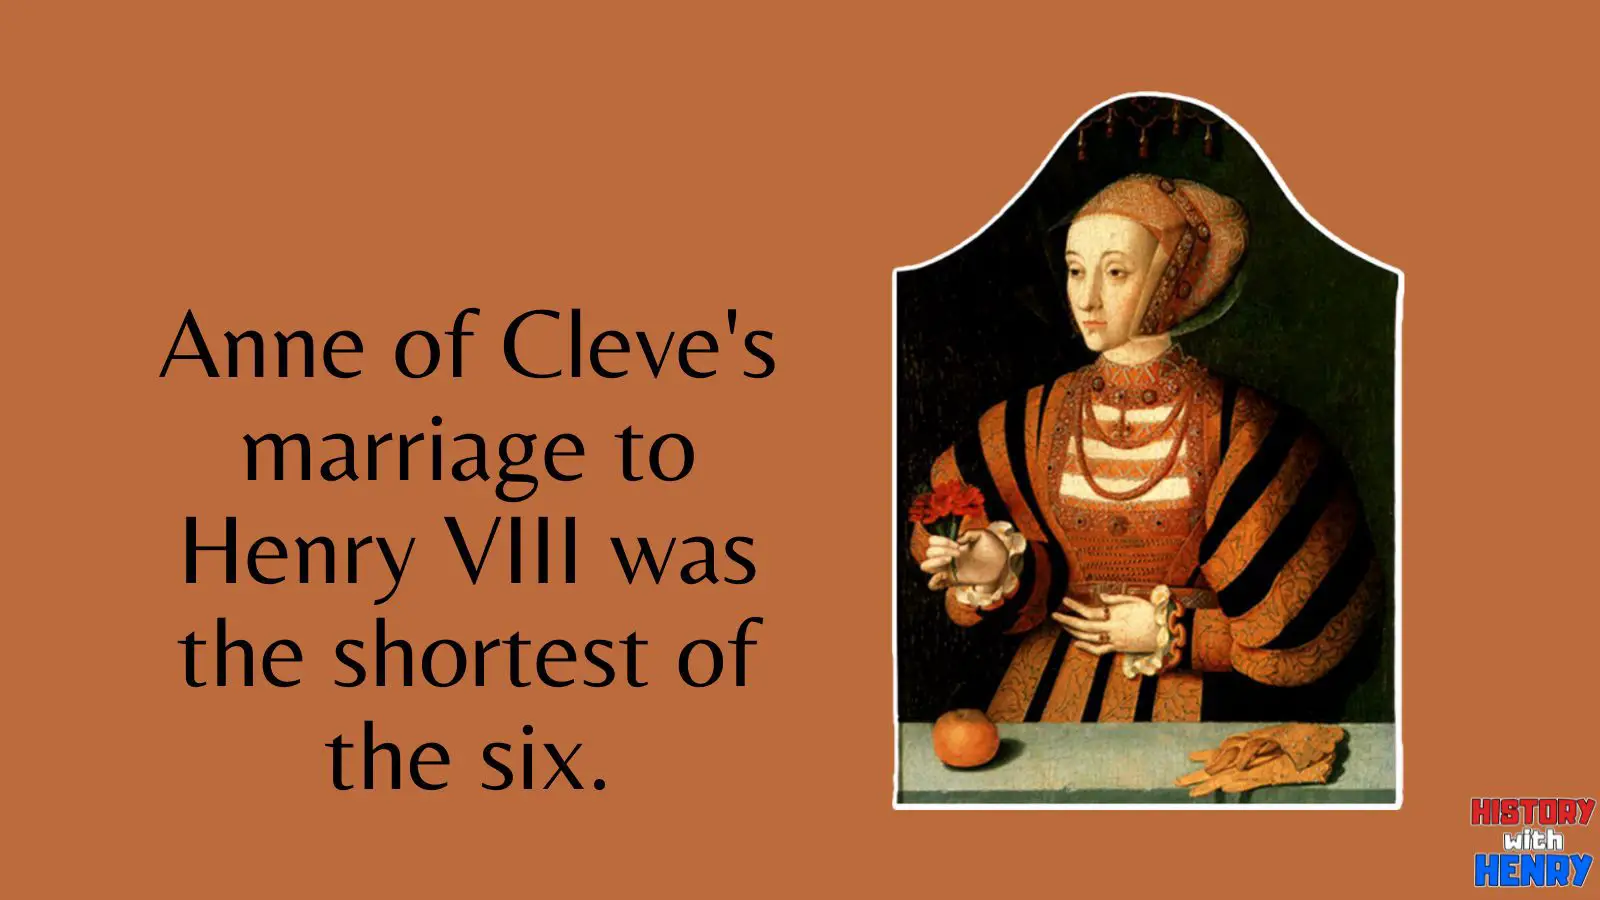 Facts about Anne of Cleves